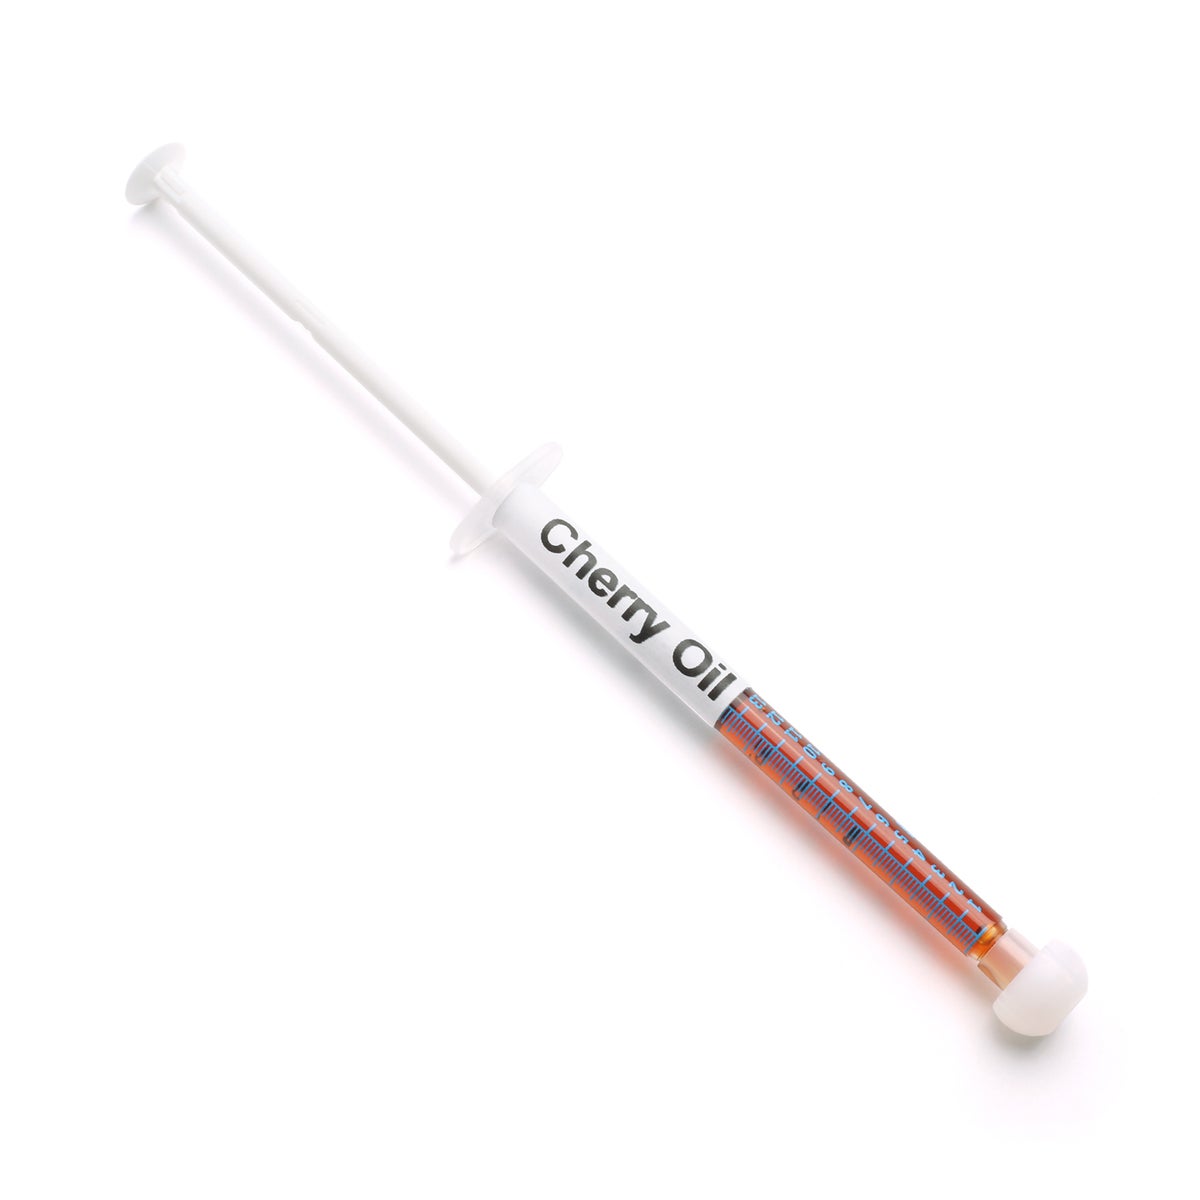 Cherry oil syringe from dark side dabs on a white background.